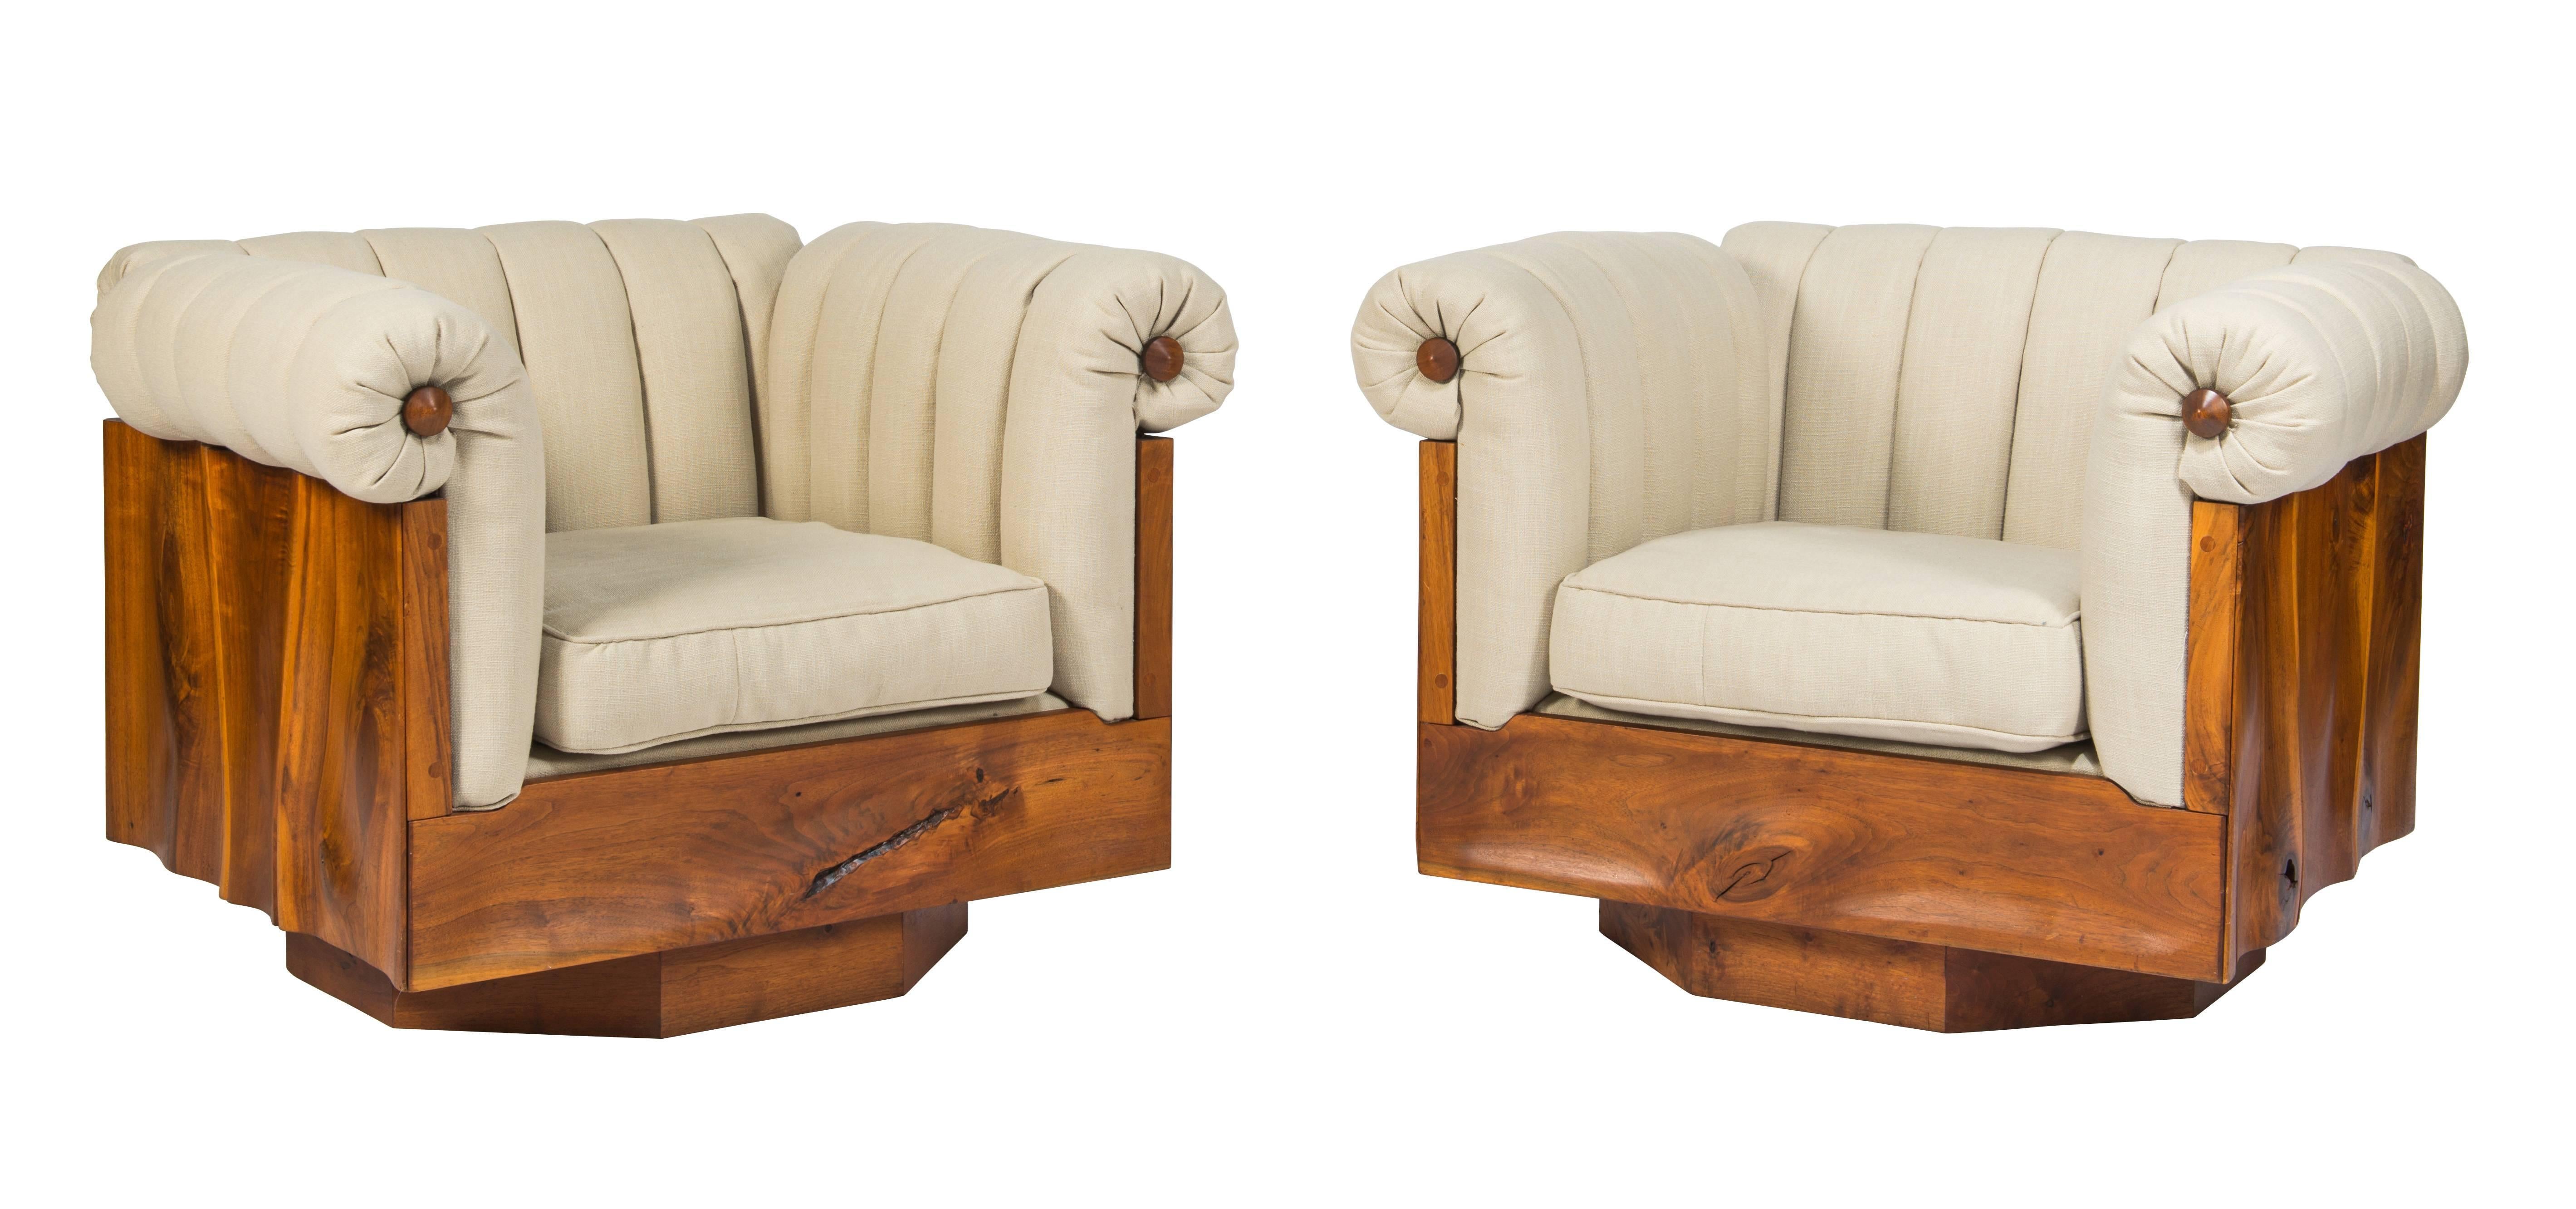 Pair of large impressive and unique Powell lounge chairs in hand-sculpted walnut on octagonal swivel bases. These chairs were made for a life-long friend of Powell's and are the only examples he produced. There is a 3rd chair also available. Chairs